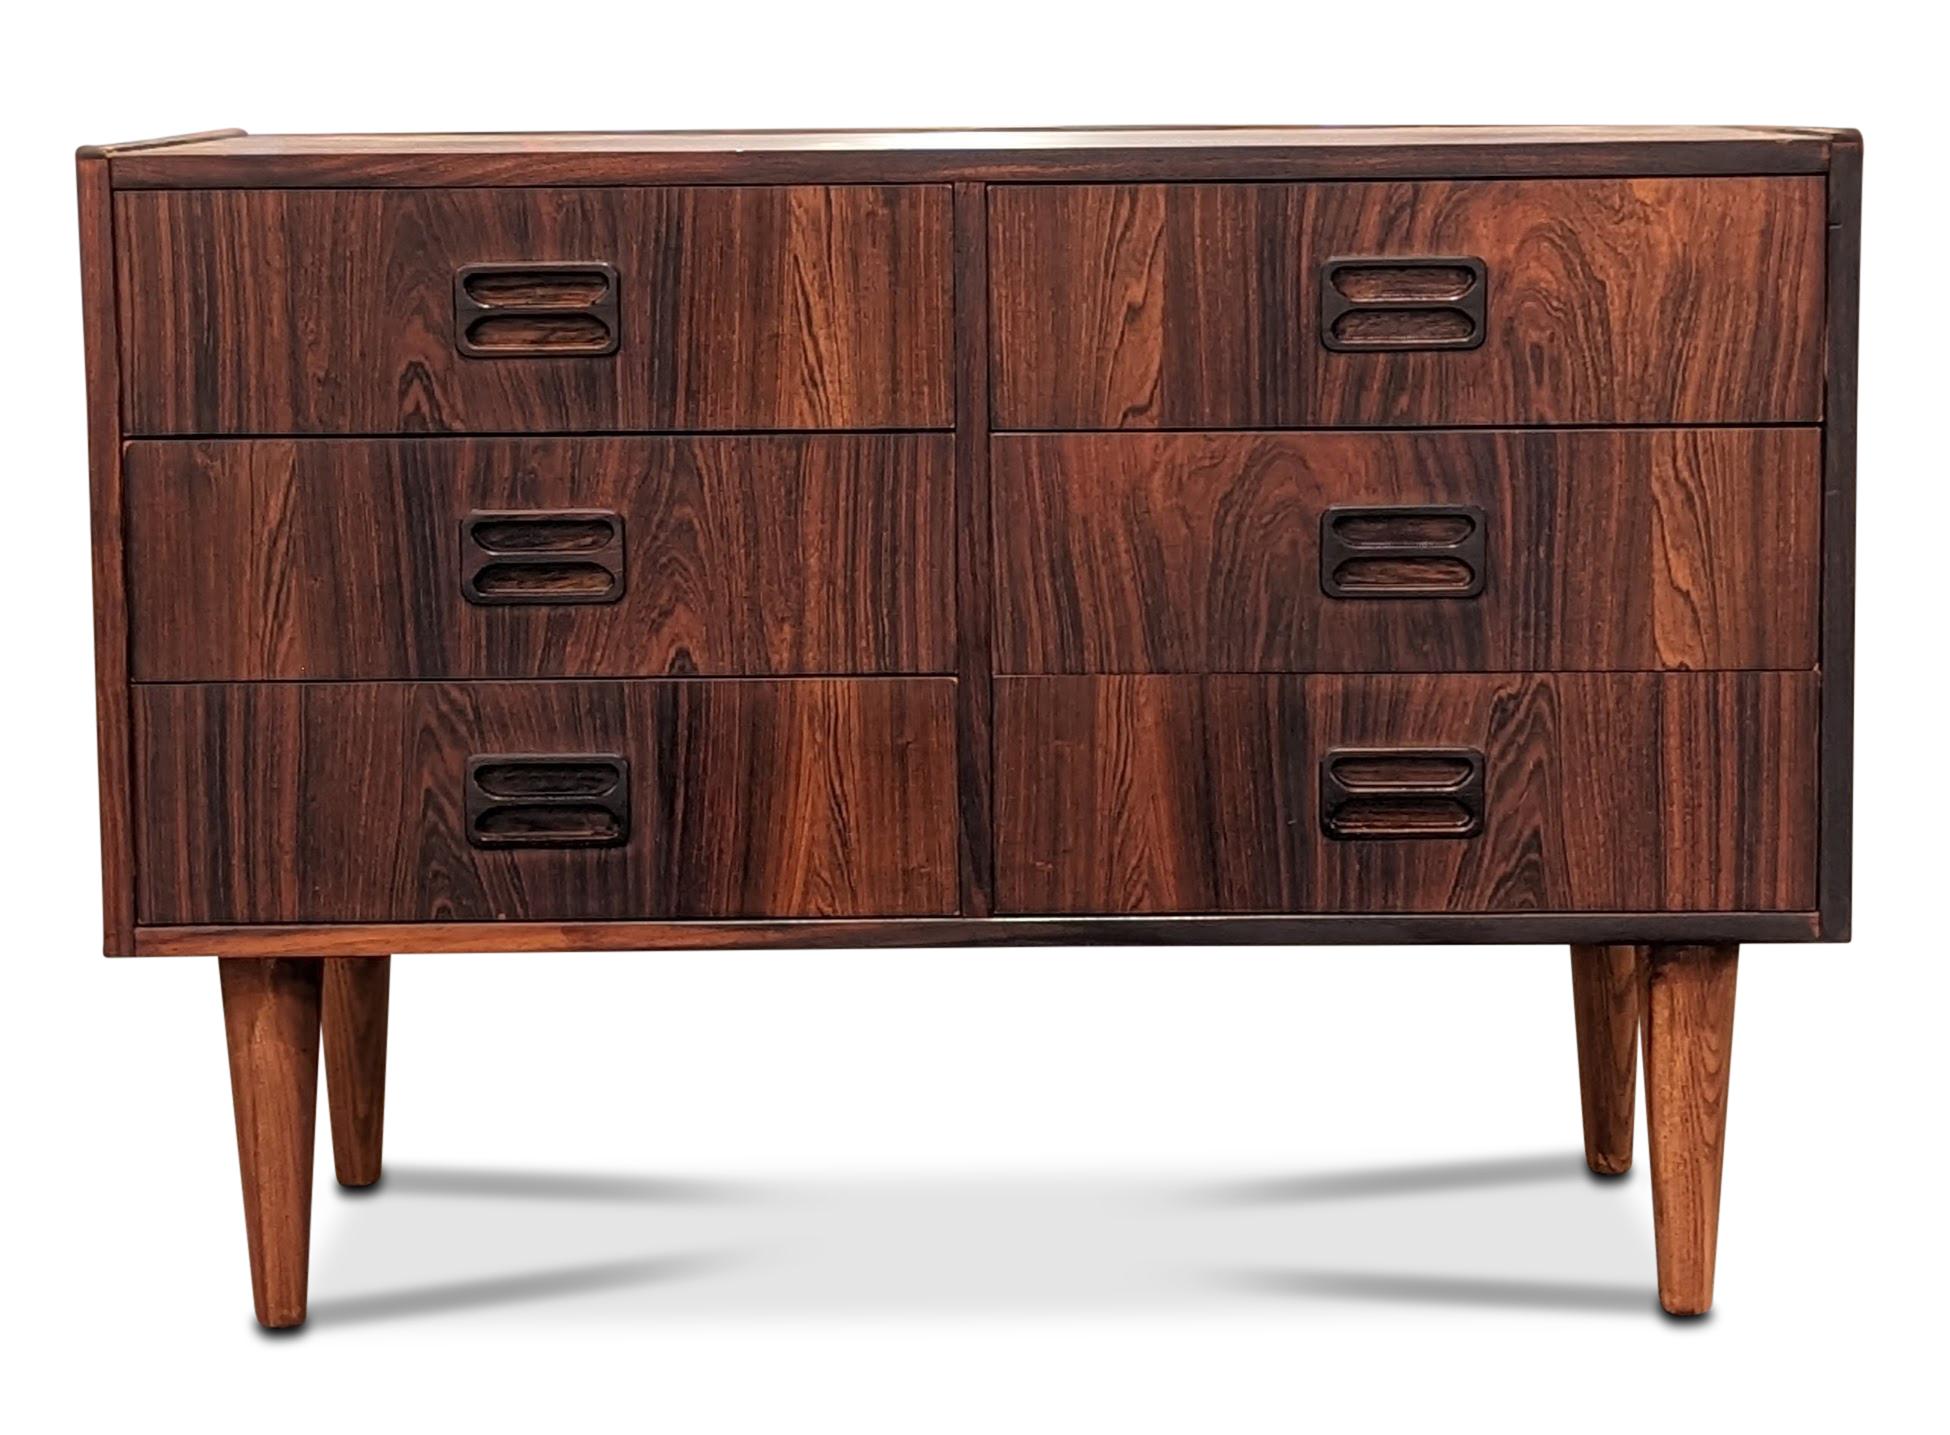 Vintage Danish Mid-Century Modern, made in the 1950s - Recently refurbished

These pieces are more than 65+ years old and some wear and tear can be expected, but we do everything we can to refurbish them in respect to the design.

Brazilian